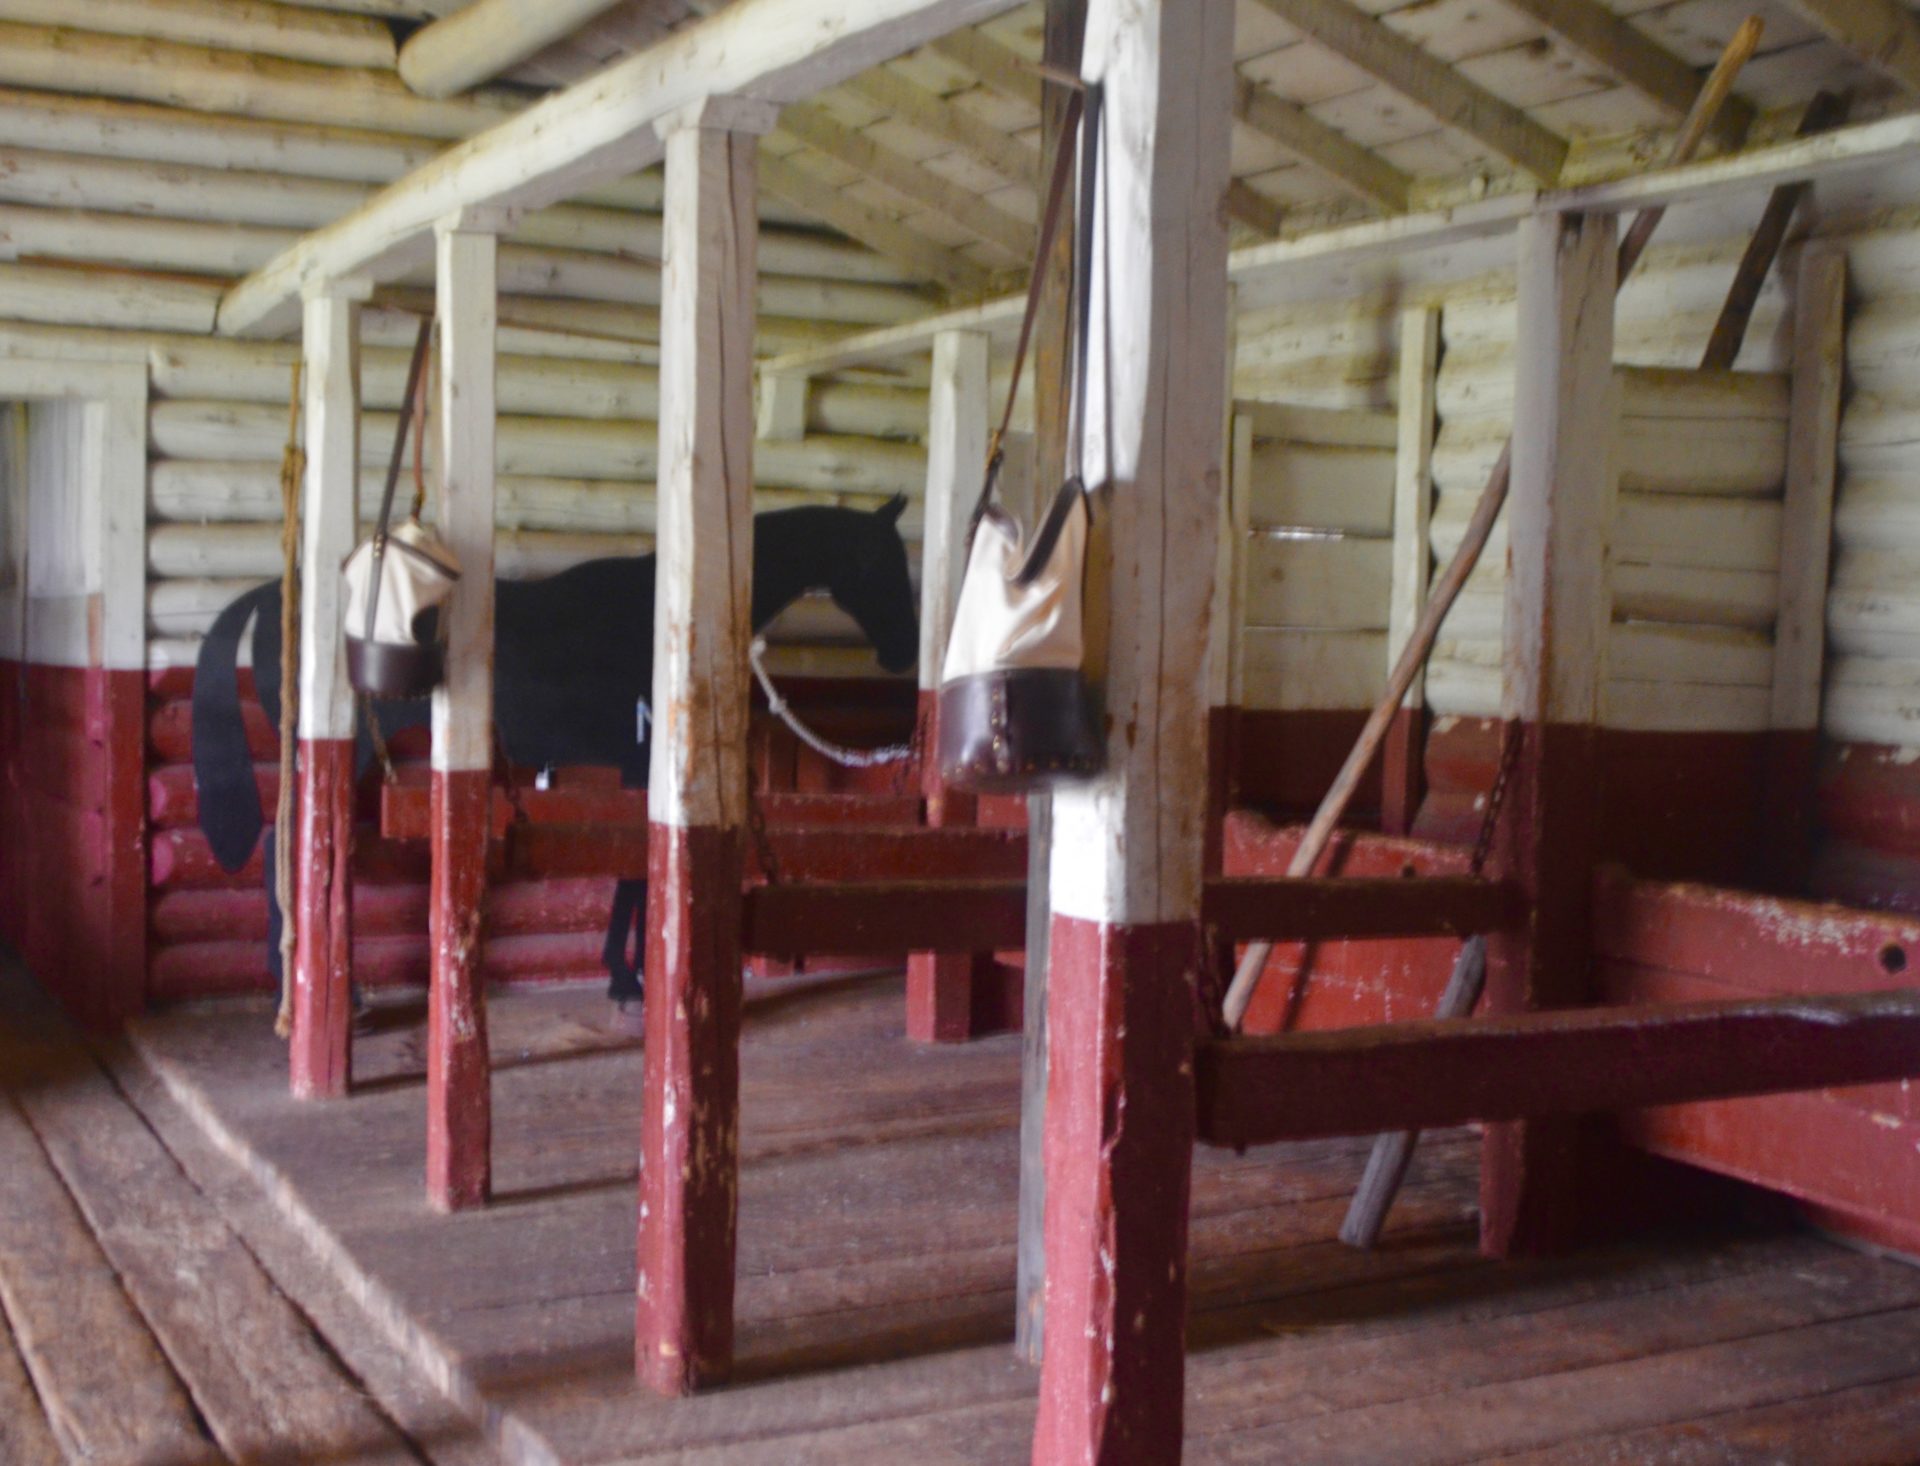 Inside the Stables at Fort Walsh